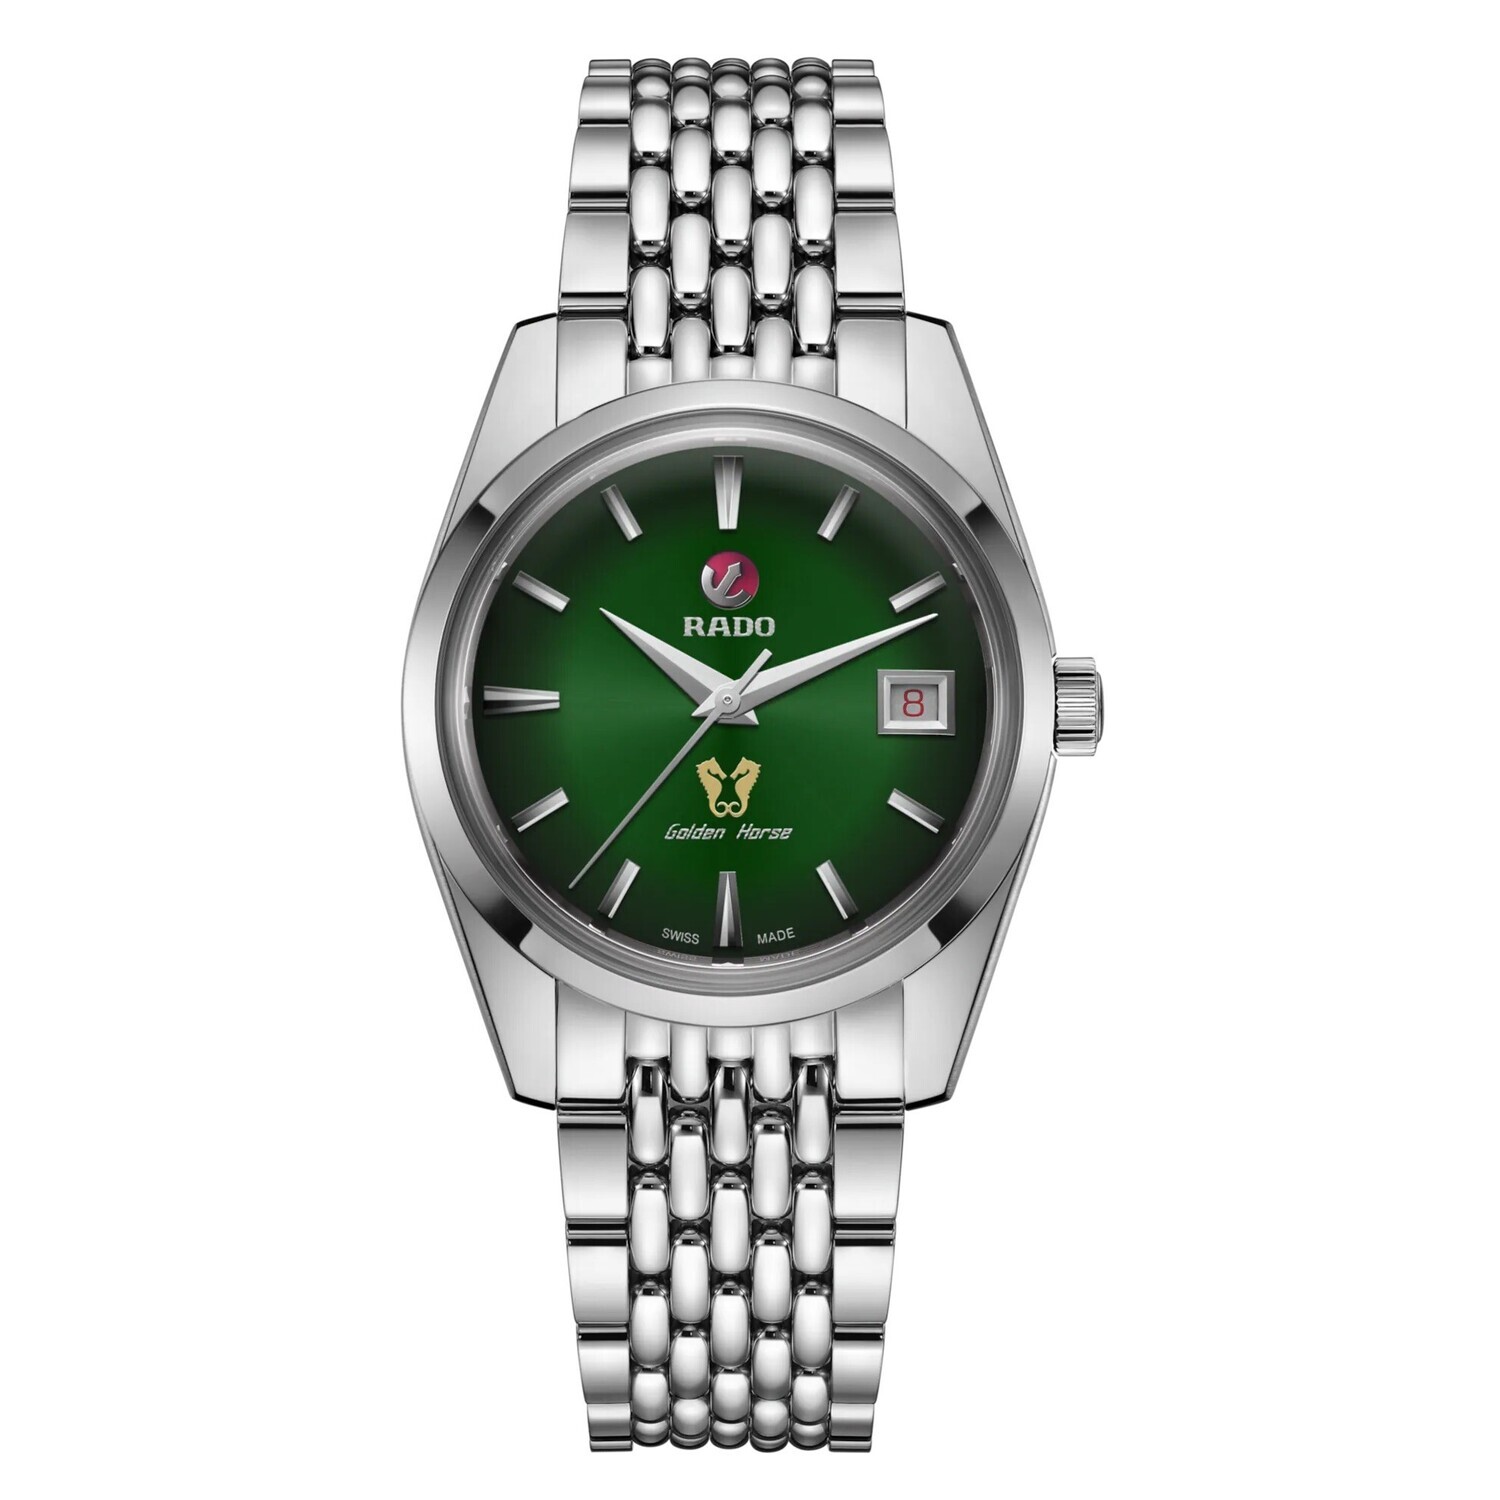 reloj unisex automático Rado Golden Horse R33930313 Automatic 37mm Limited Edition ST Steel Green Dial Unisex Sapphire glass anti-reflective Watch for men and women 50m